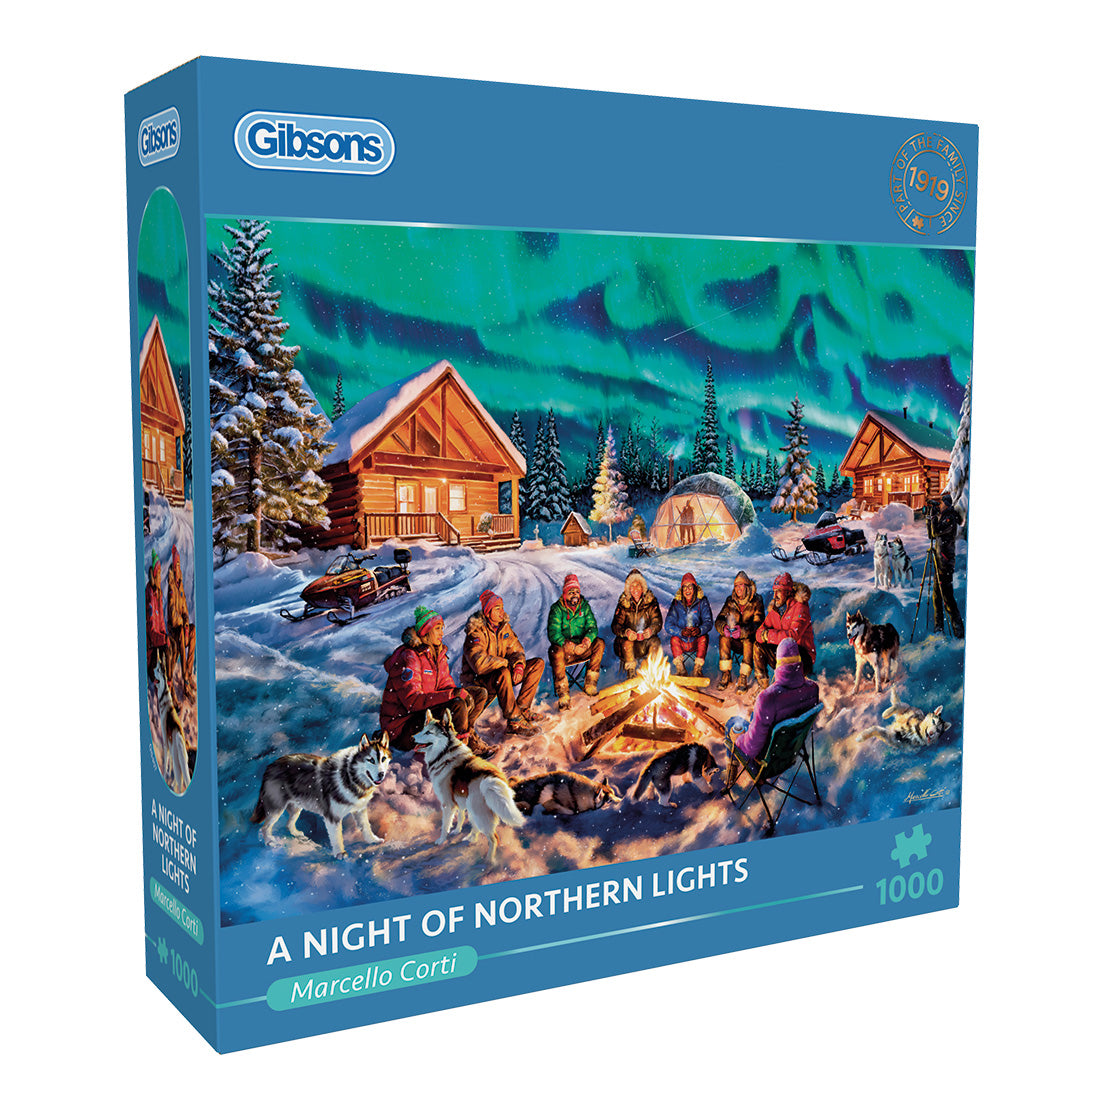 Gibsons - A Night of Northern Lights - 1000 Piece Jigsaw Puzzle